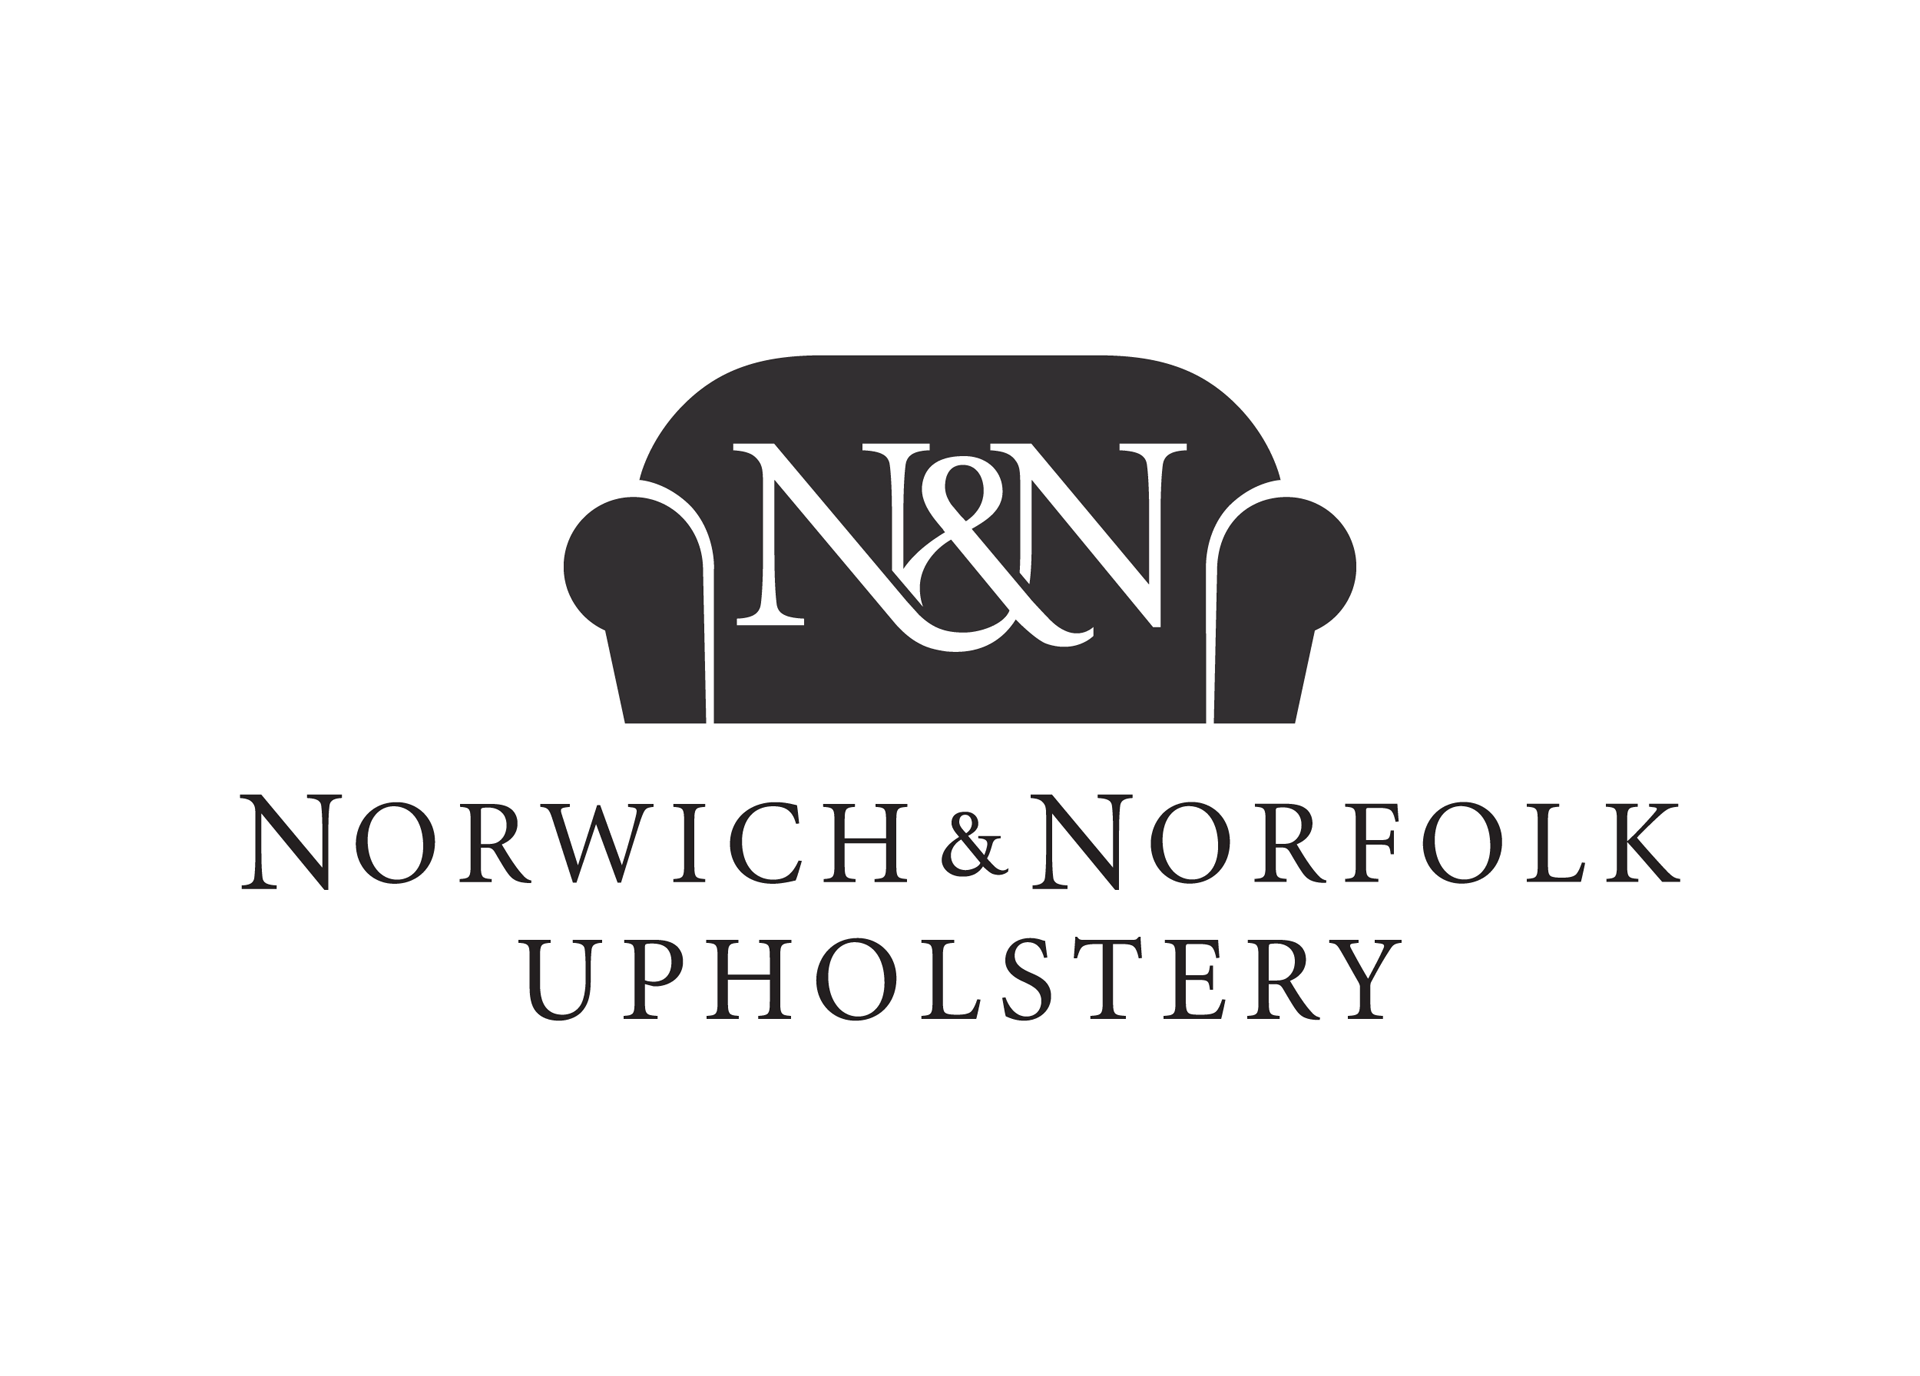 Norwich and Norfolk Upholstery brand design